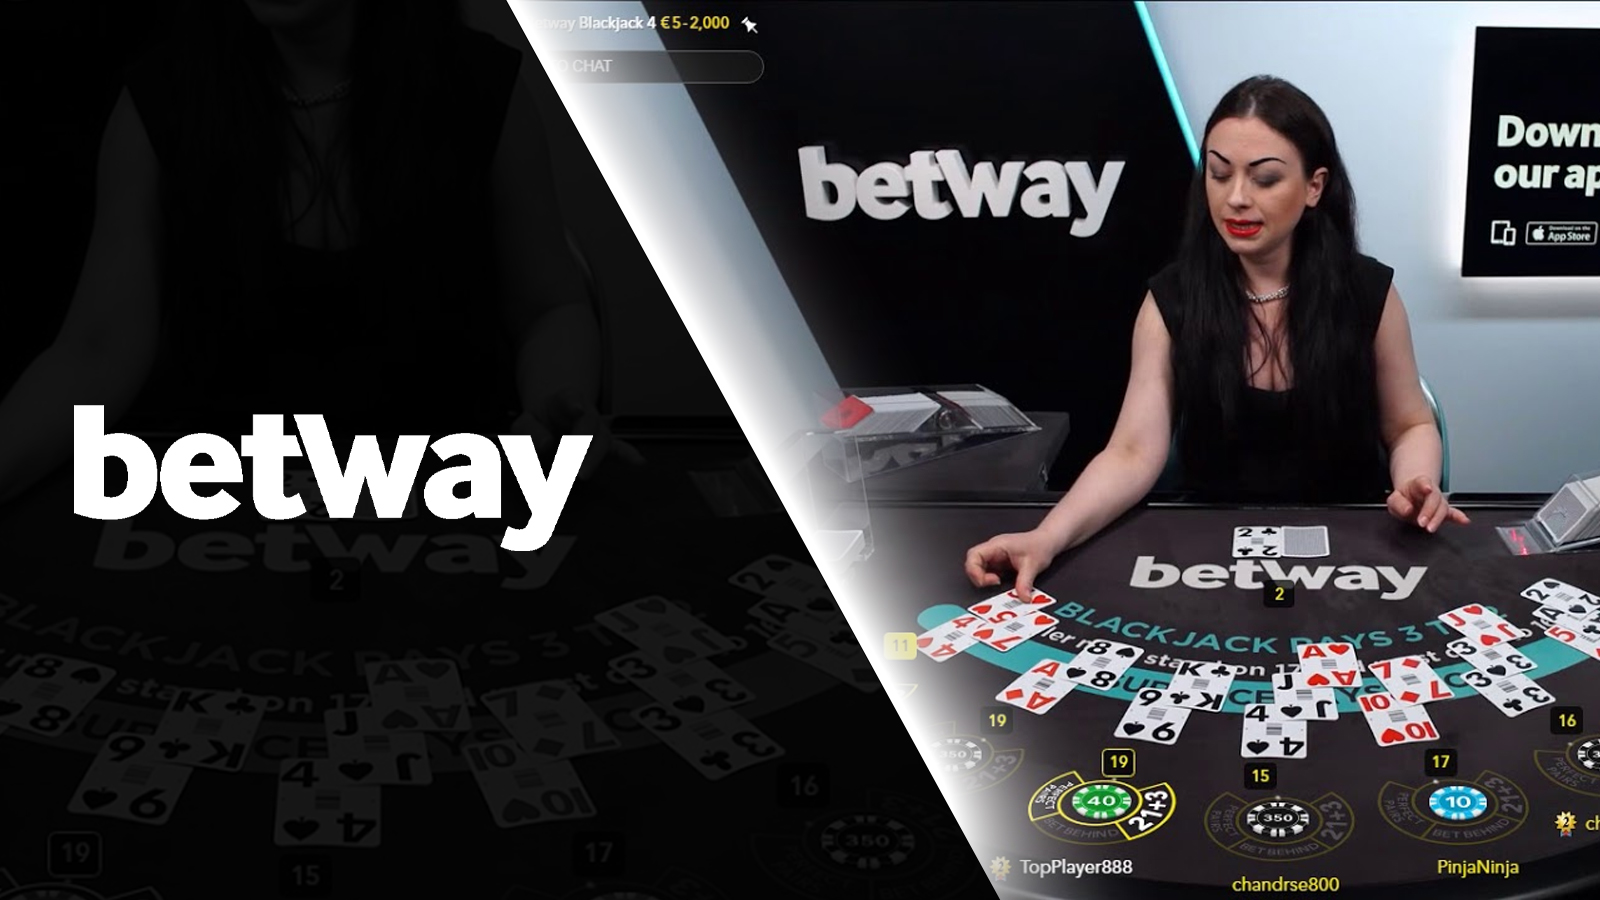 Choose one of 22 Blackjack games and enjoy them at Betway casino.